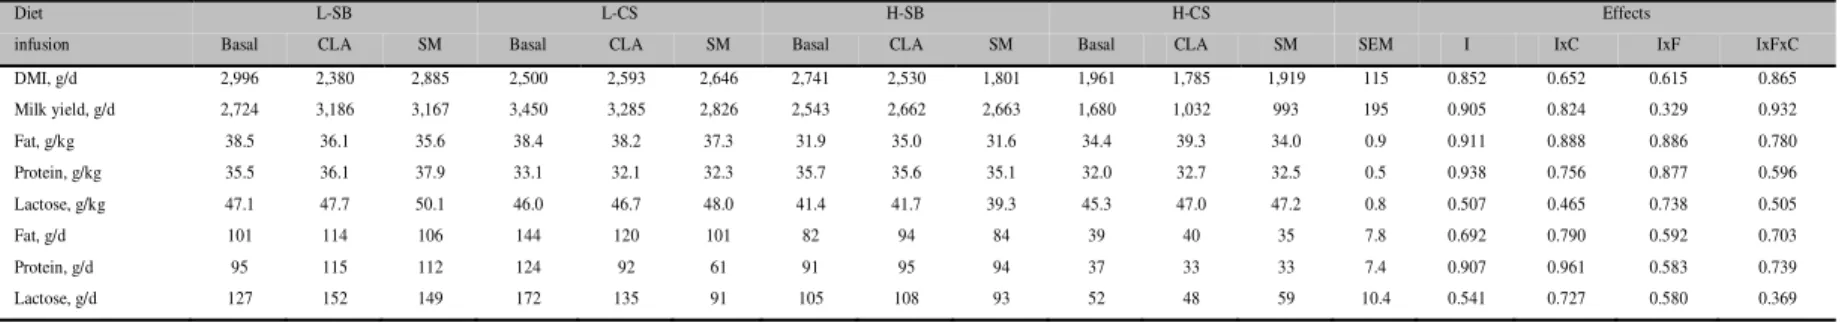 Table 2. Milk fatty acid profile of mid-lactation dairy goats fed low (L) or high (H) percentages of concentrate diets with extruded soybeans (SB) or  rolled canola seeds (CS) before (basal) and during duodenal infusion of t10,c12-C18:2 emulsion (CLA) or s